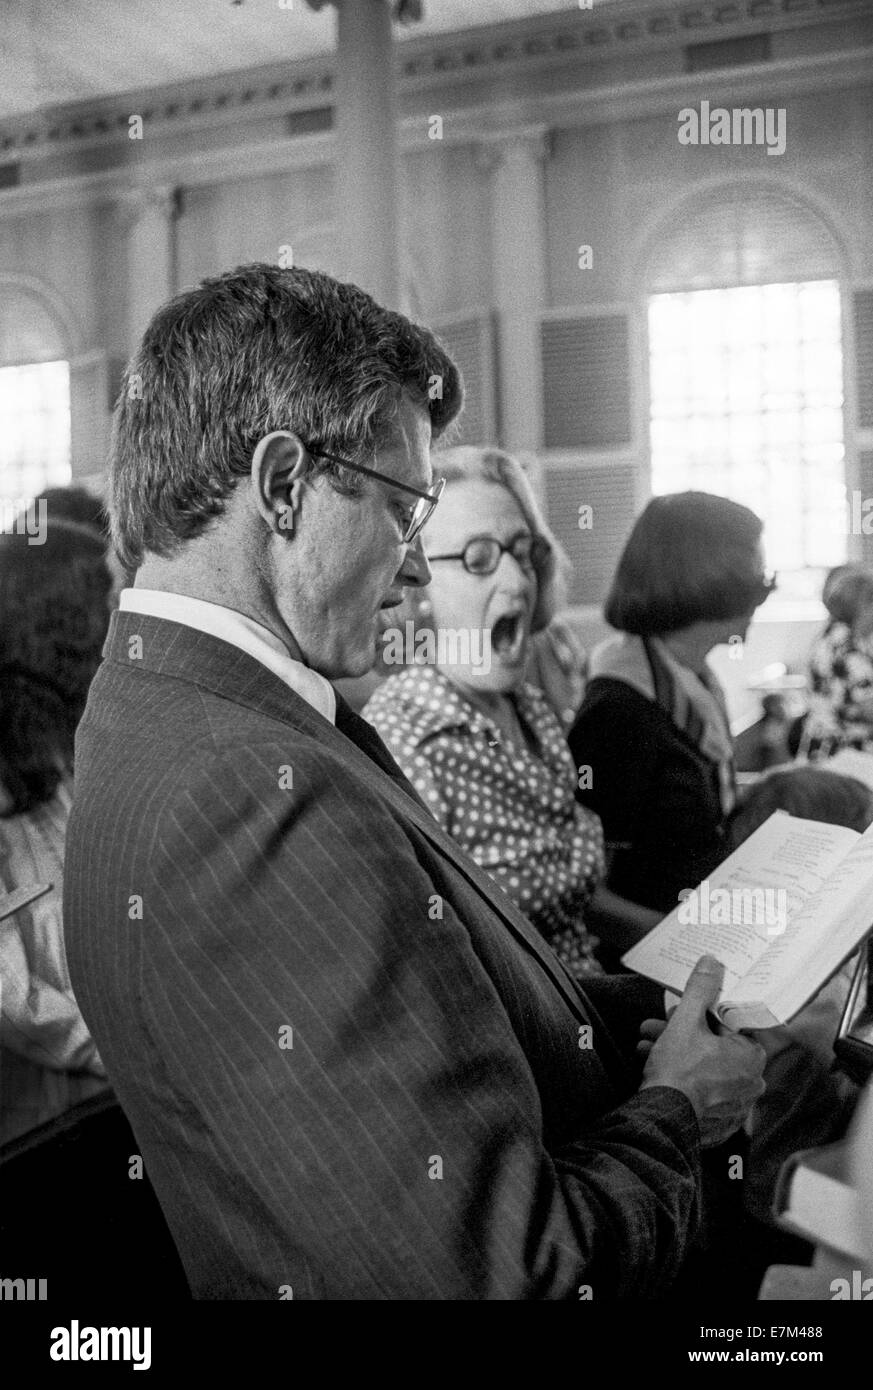 Parishioners sing a hymn on Sunday at a historic Baptist church in Cambridge, MA. Stock Photo